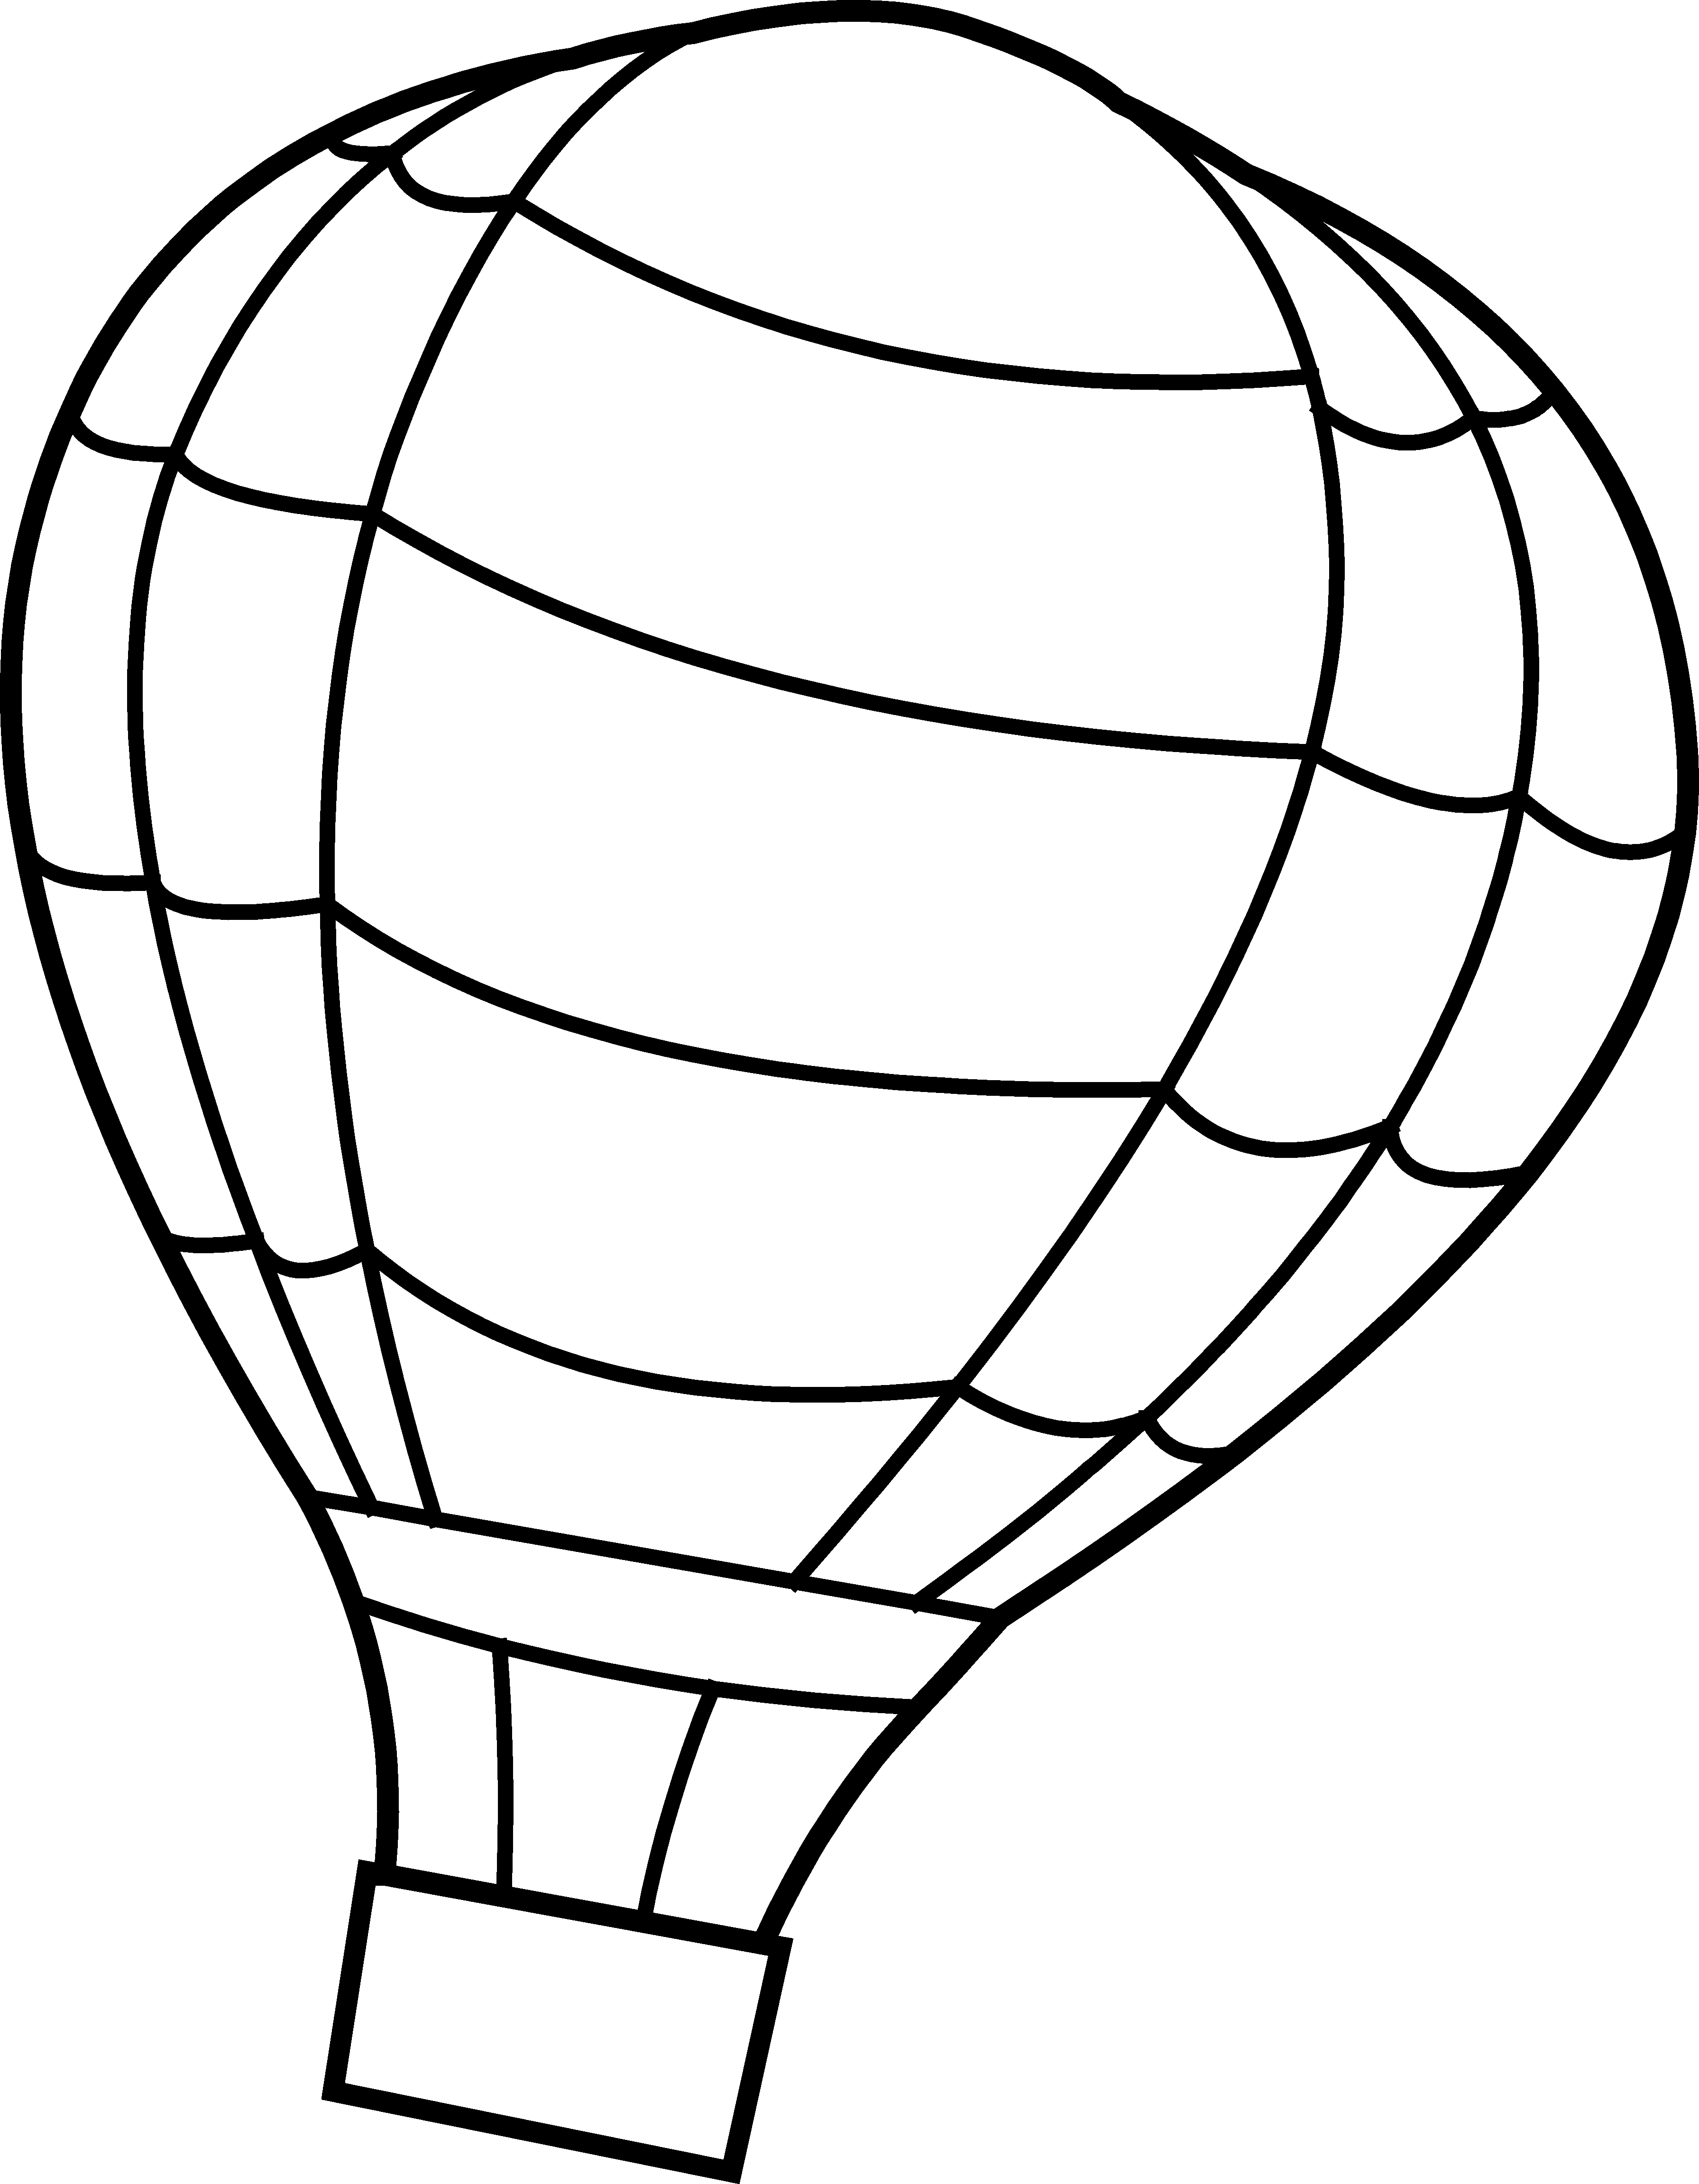 Images For > Balloon Black And White Clip Art